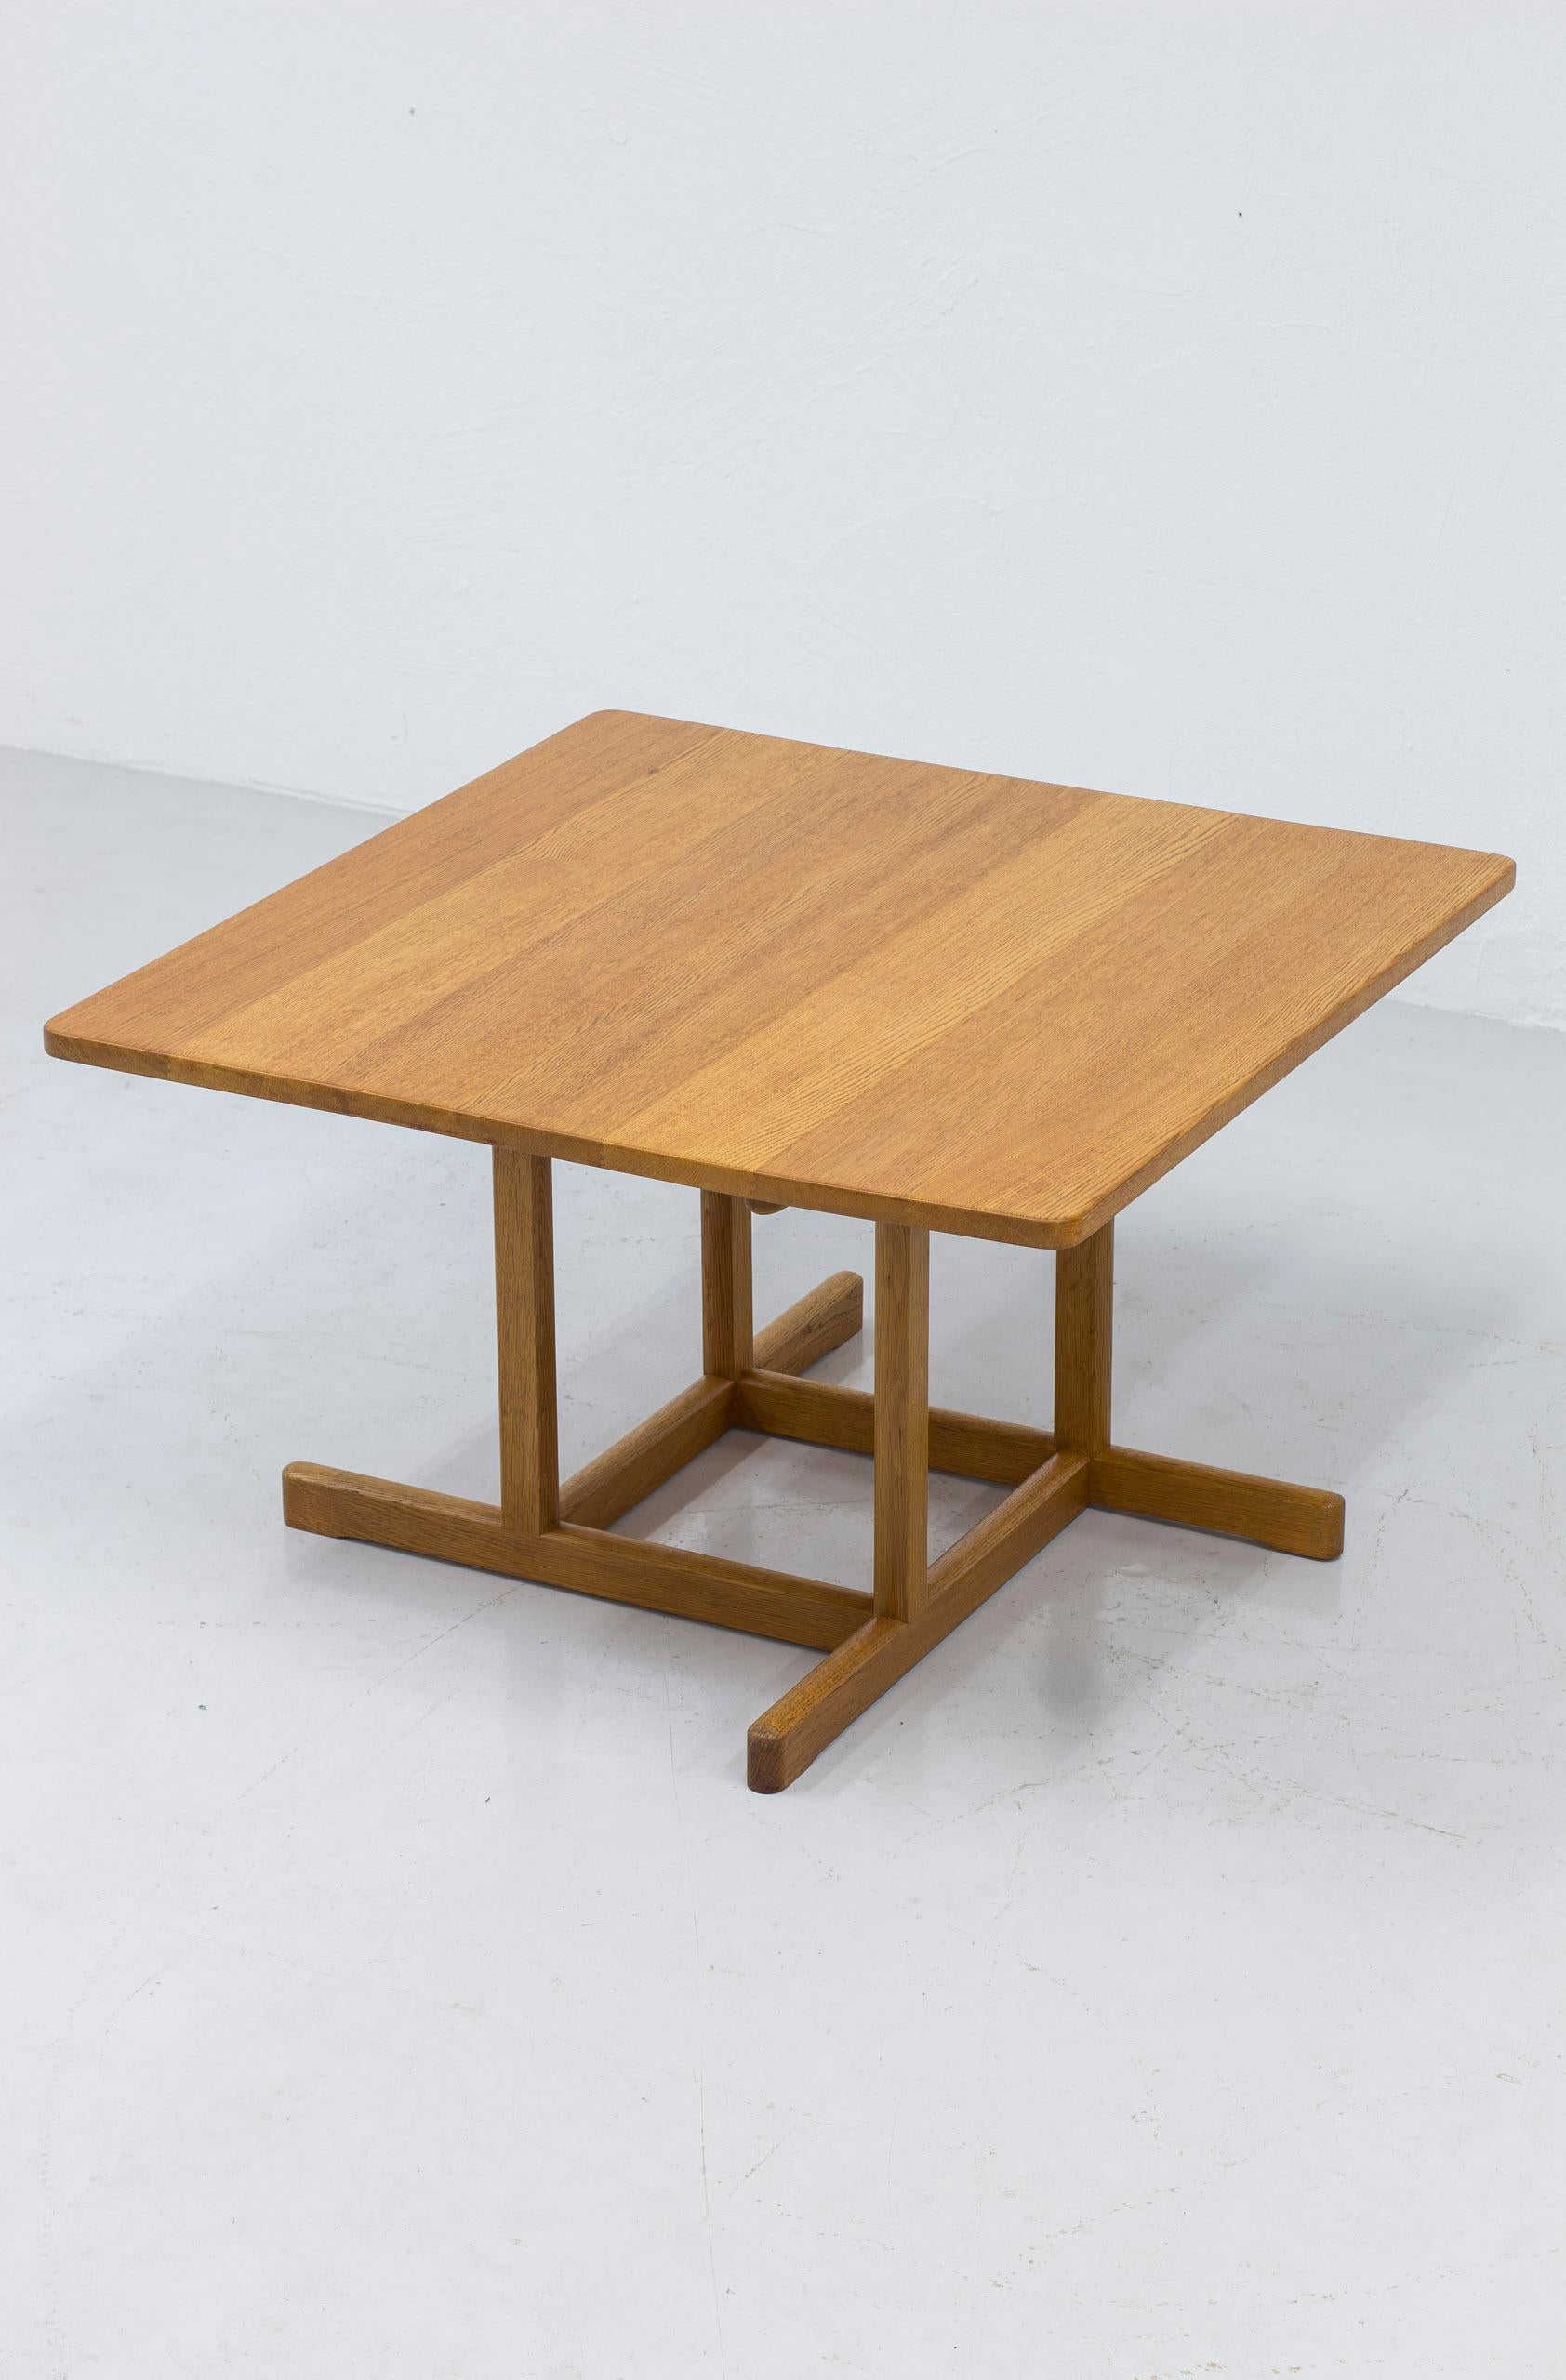 Sofa table model 271 designed by Børge Mogensen. Produced in Denmark by Fredericia Stolefabrik during the late 1950s-1960s. Made from solid oak. Very good vintage condition with light signs of age related wear and patina. 

Table model 271 was